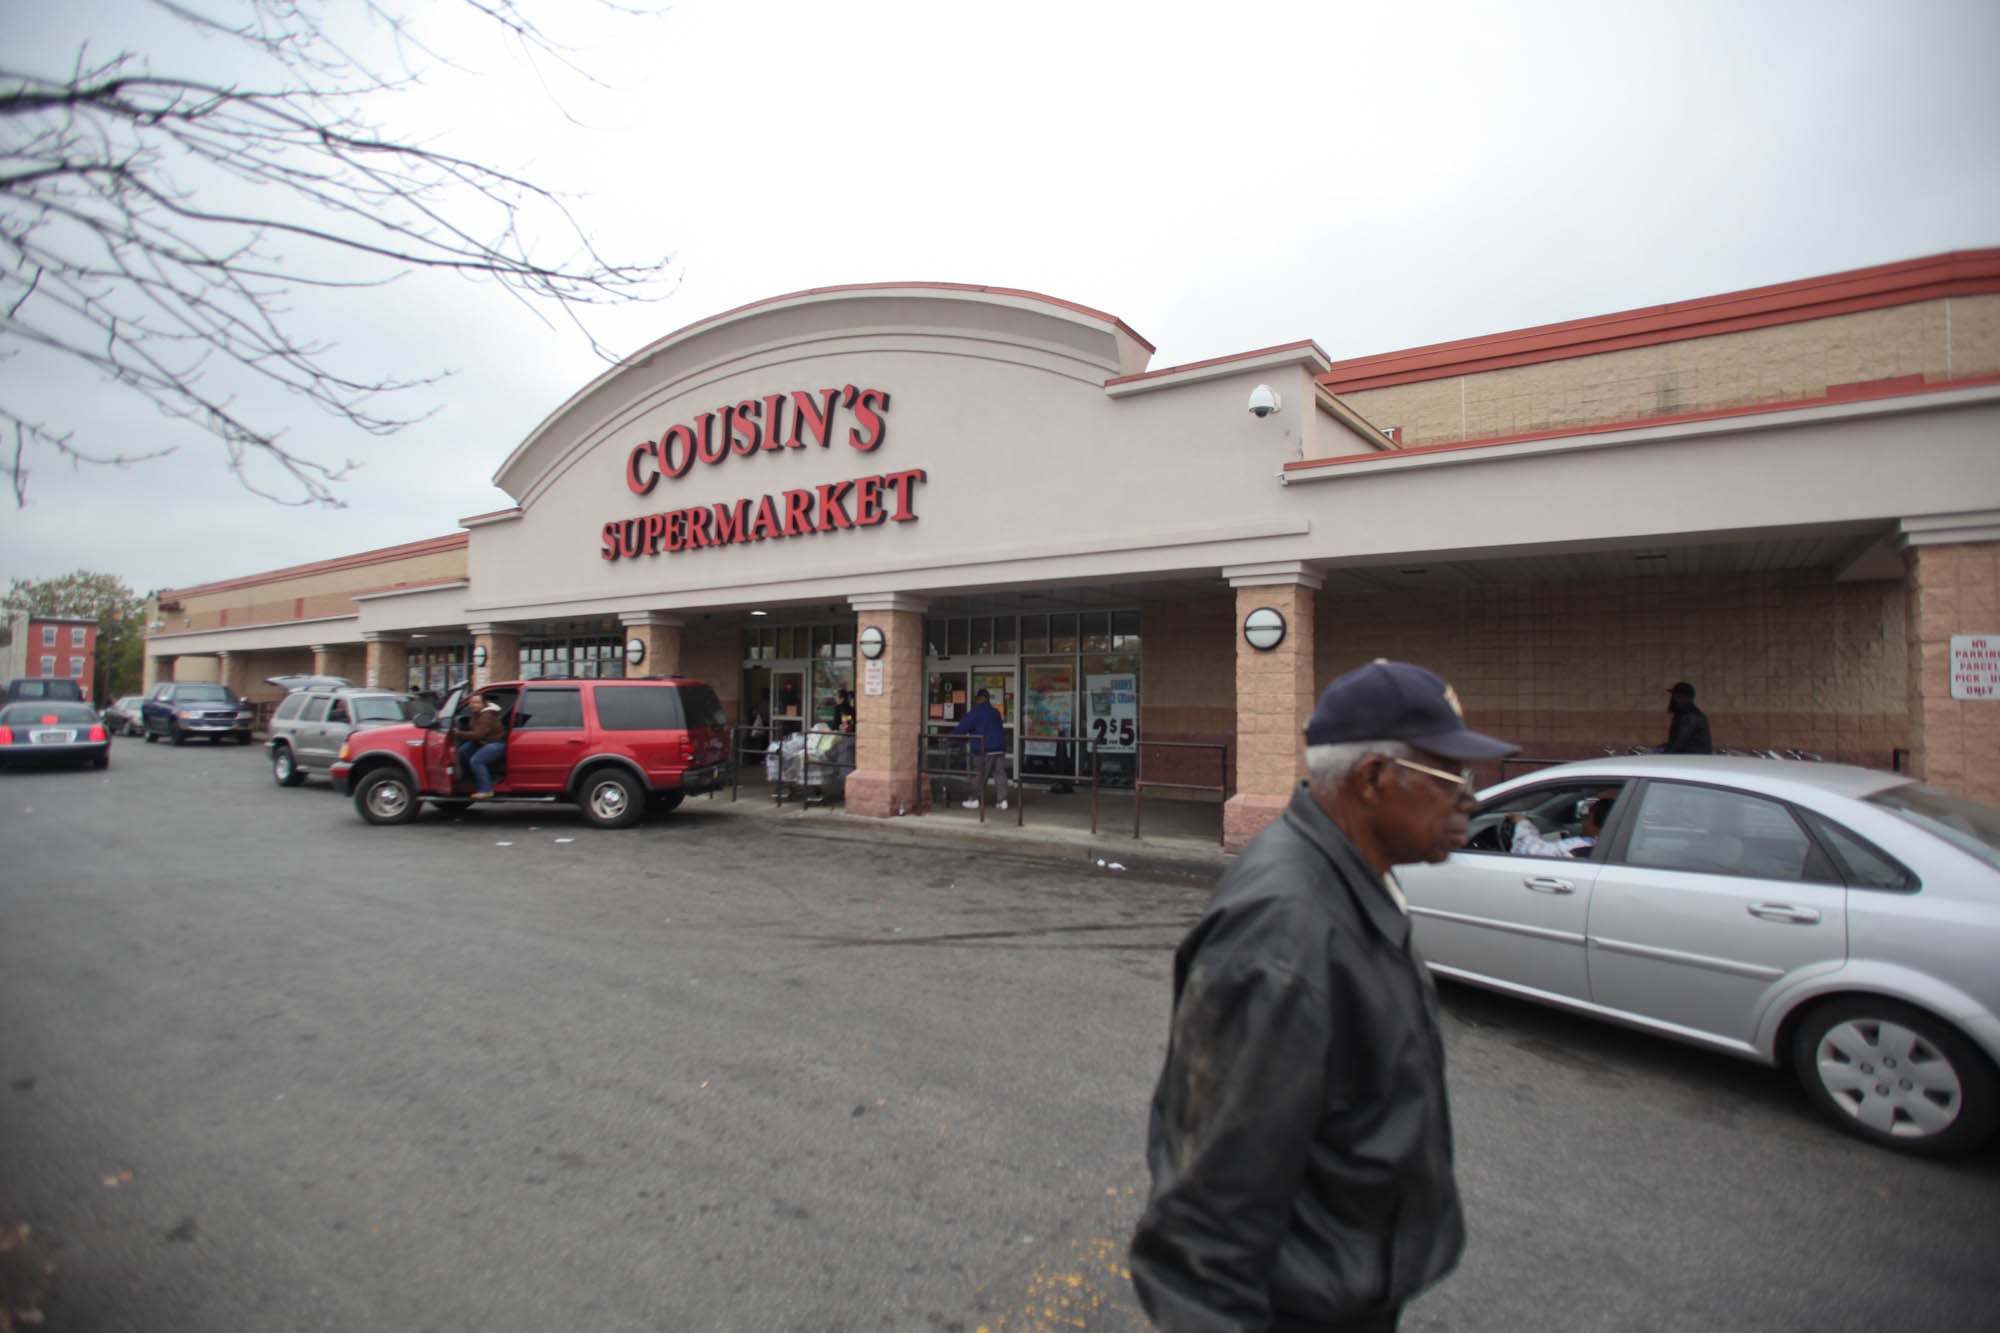  A customer walks away from Cousin's Supermarket, located at 5th and Berks streets. 